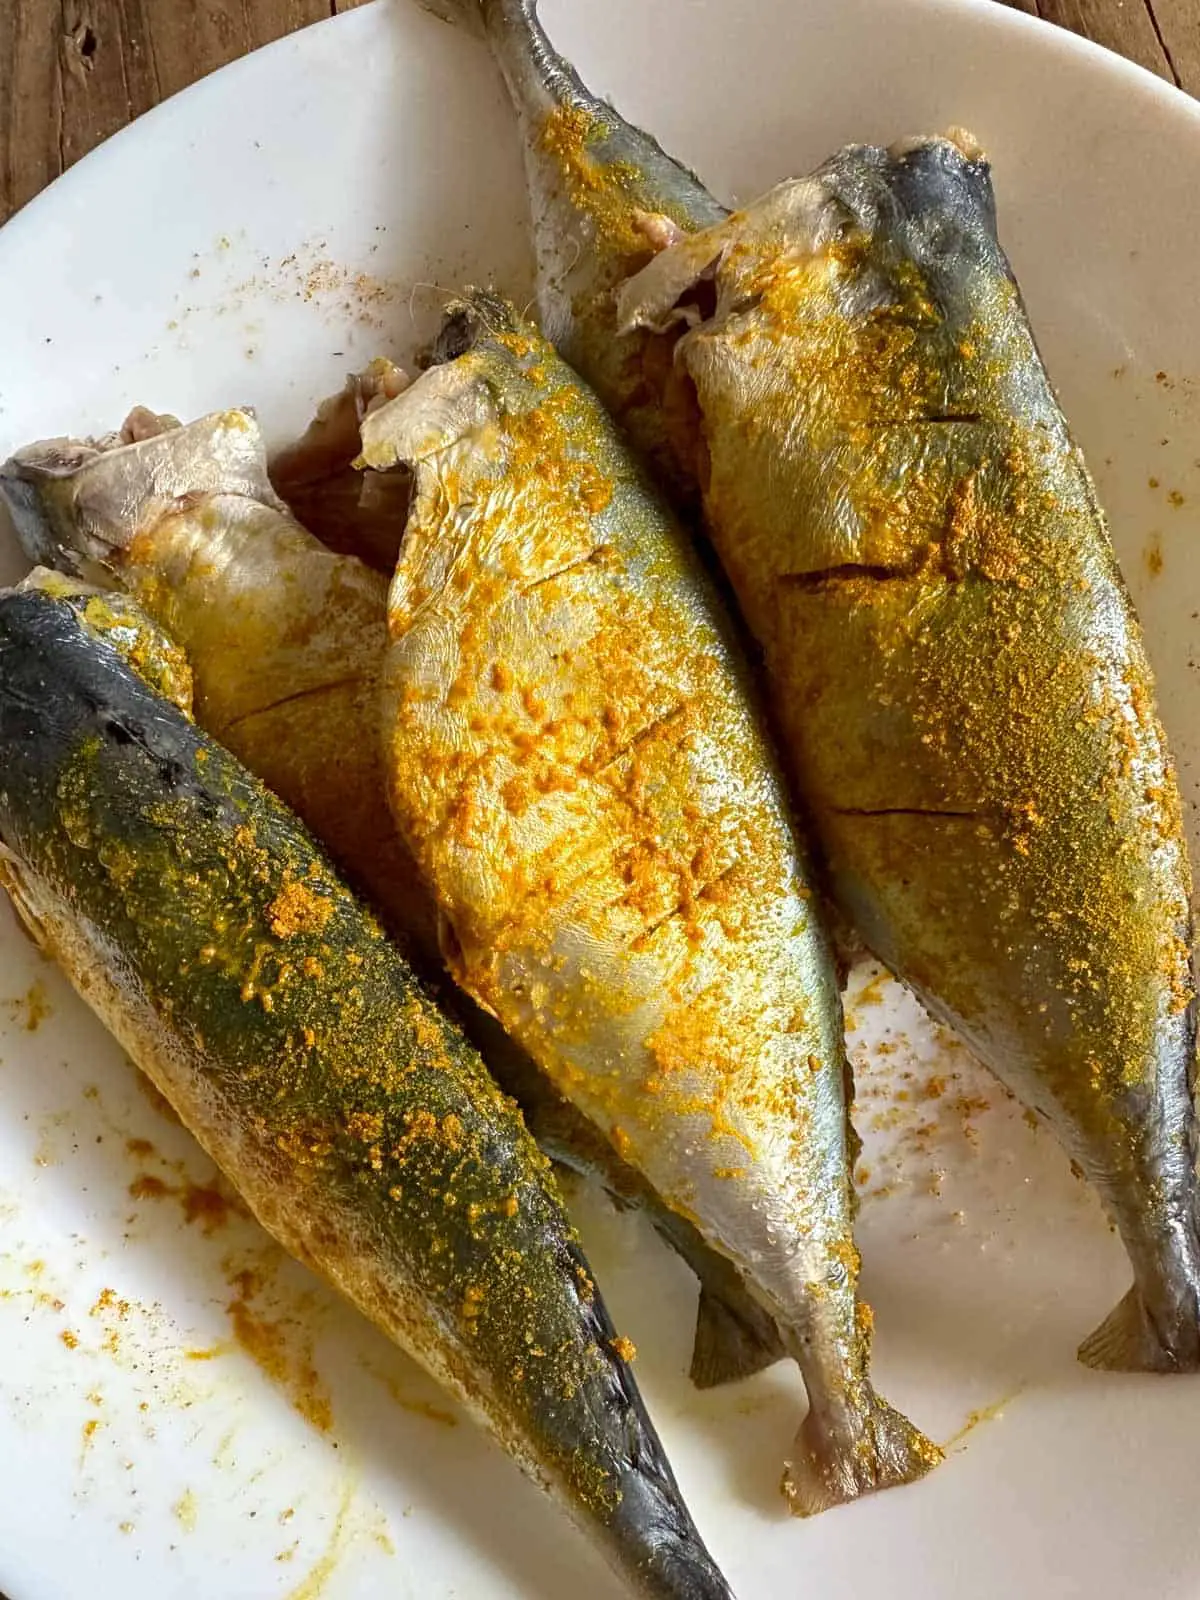 Uncooked mackerel coated with salt and turmeric in a white bowl.